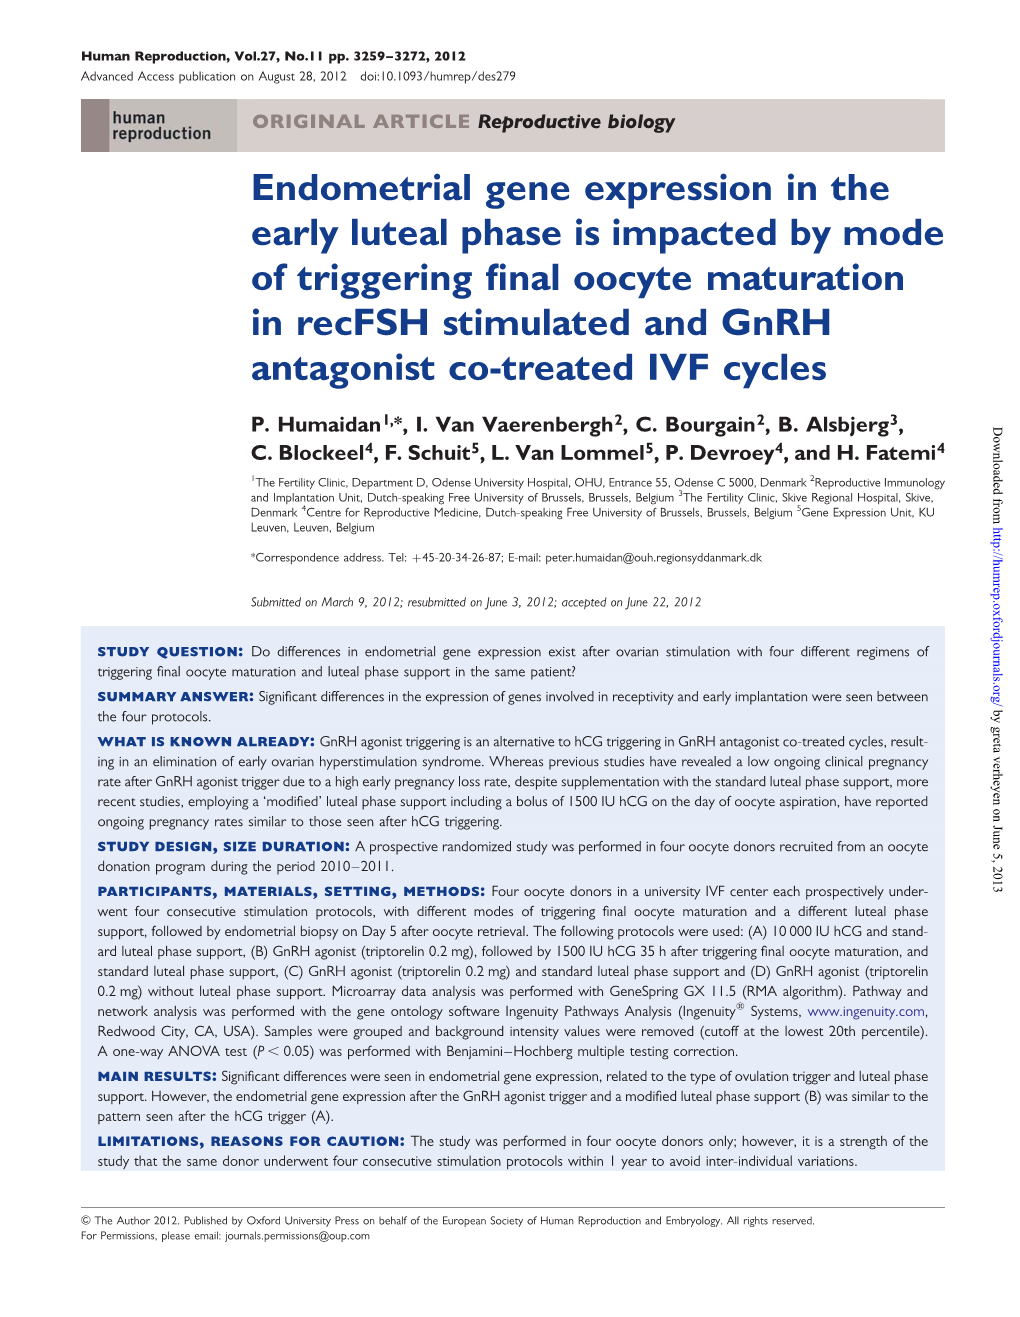 Endometrial Gene Expression in the Early Luteal Phase Is Impacted By